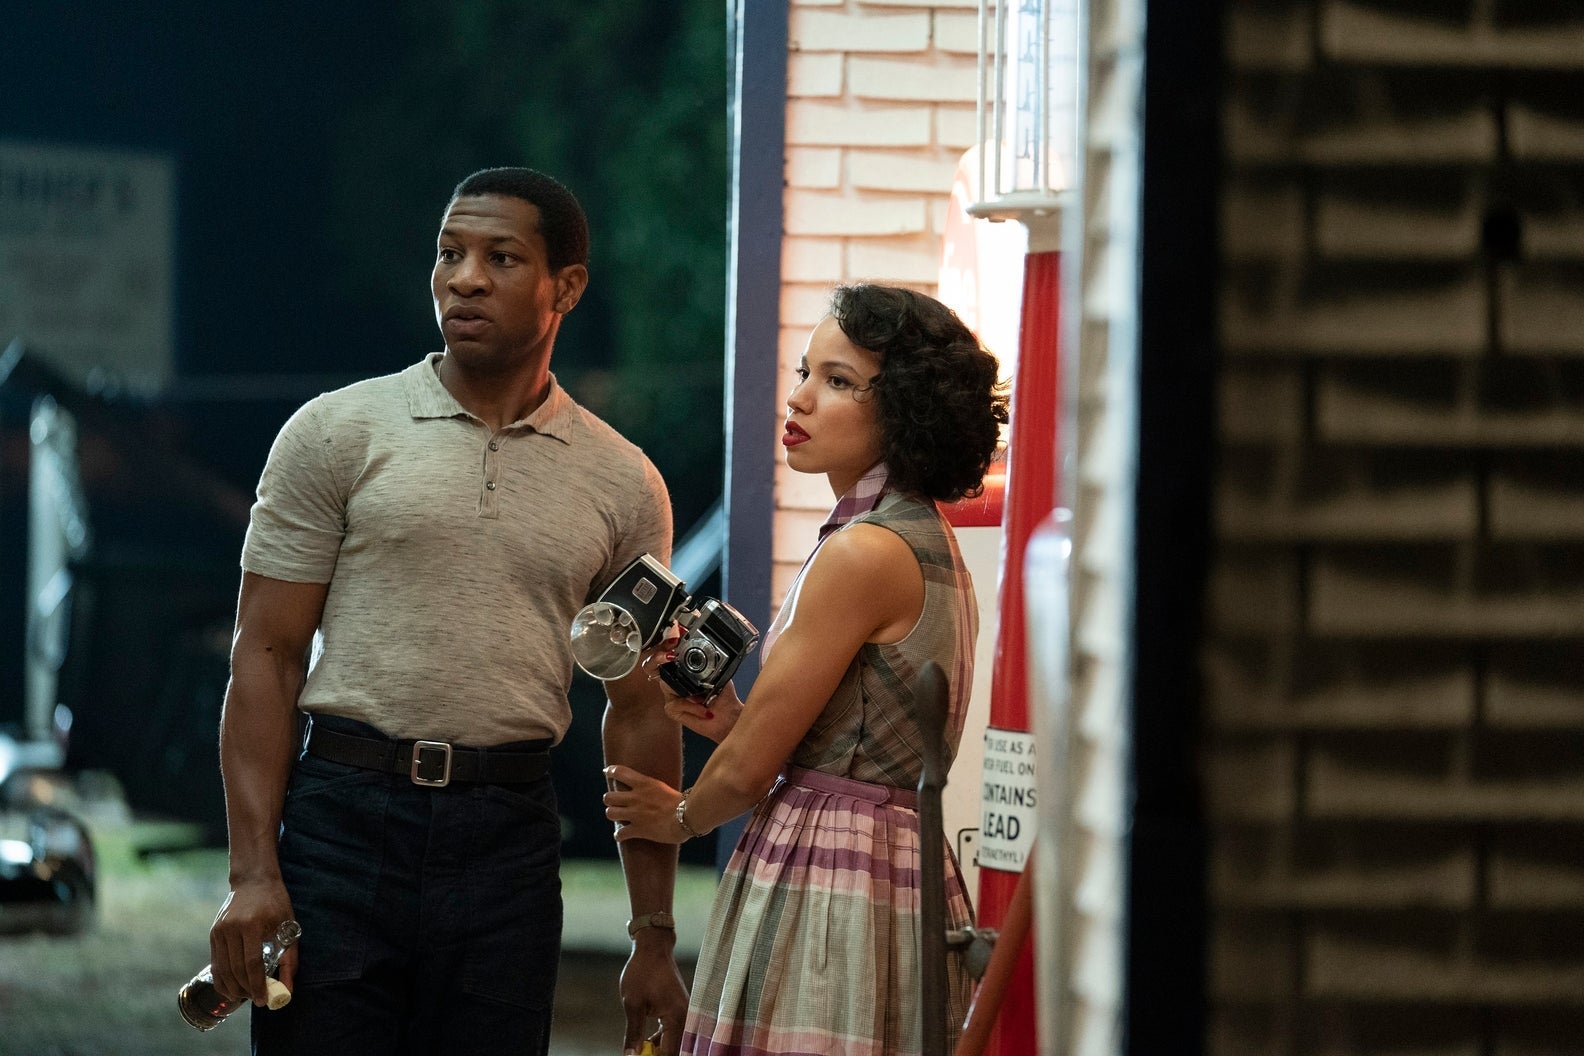 In a still from the show, Majors and Smollett look handsome, stylish, and afraid, at night at a roadside stop. Smollett is holding a camera.